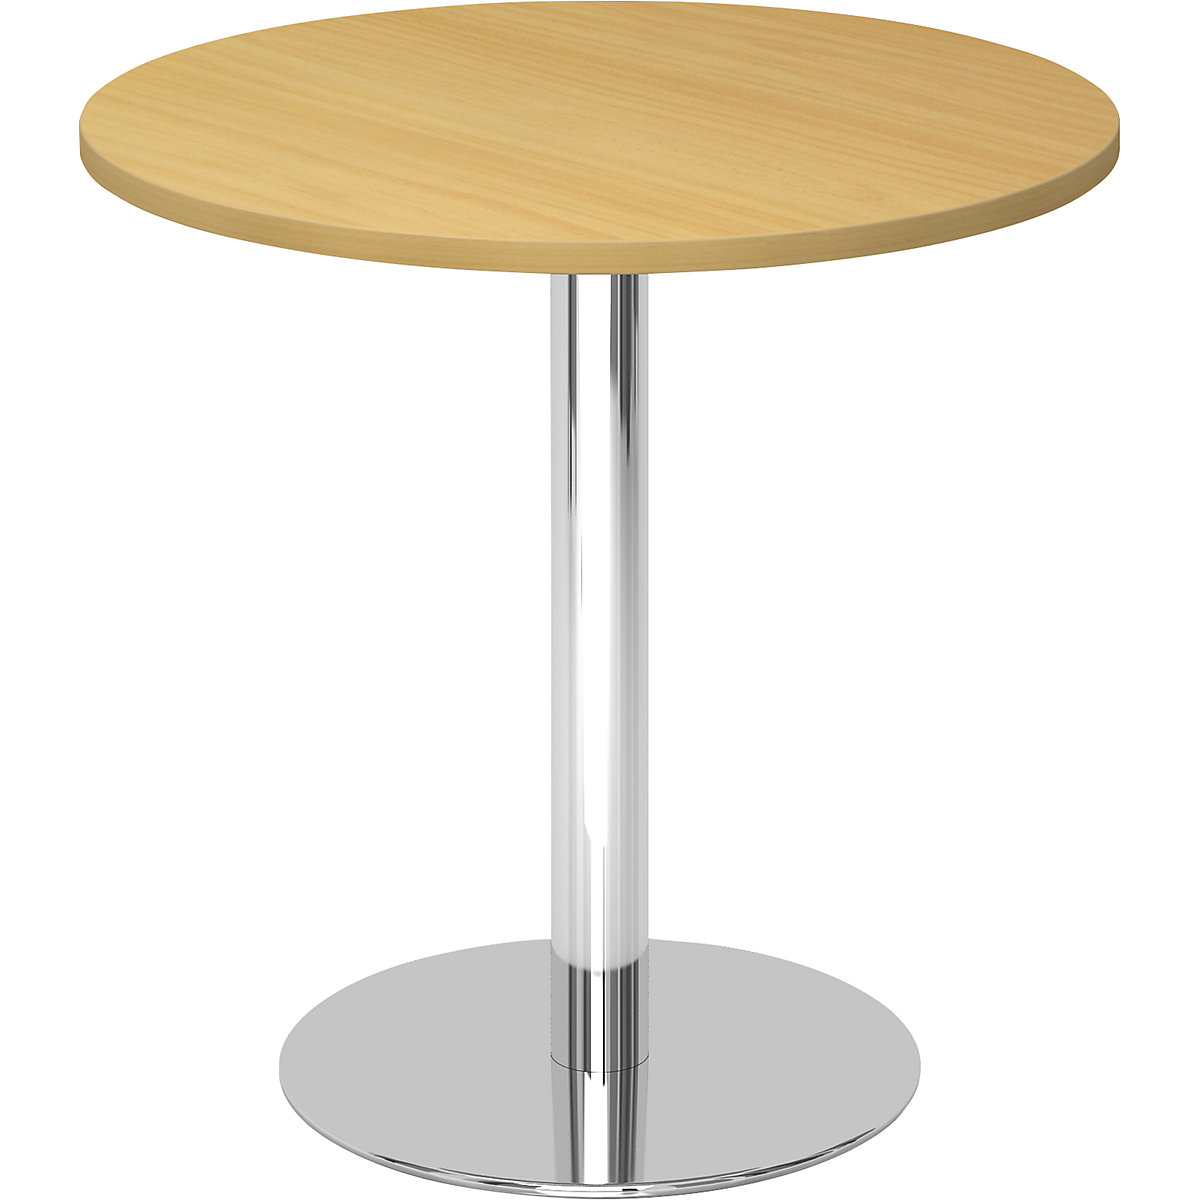 Conference table, Ø 800 mm, 755 mm high, chrome plated frame, tabletop in beech finish-3